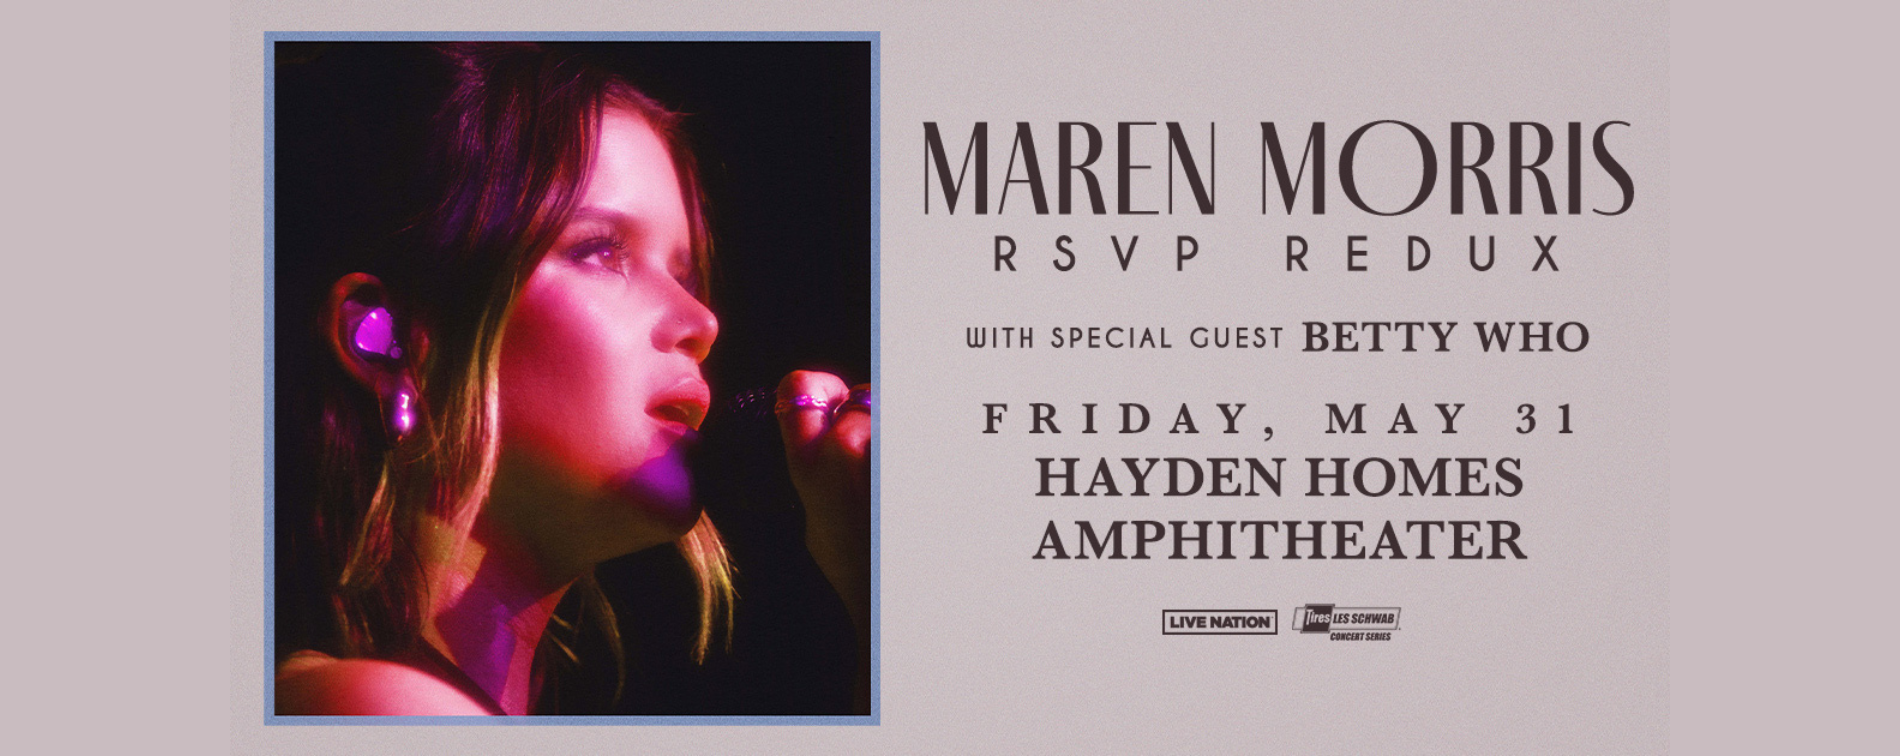 Maren Morris performing live, capturing the essence of the concert experience.